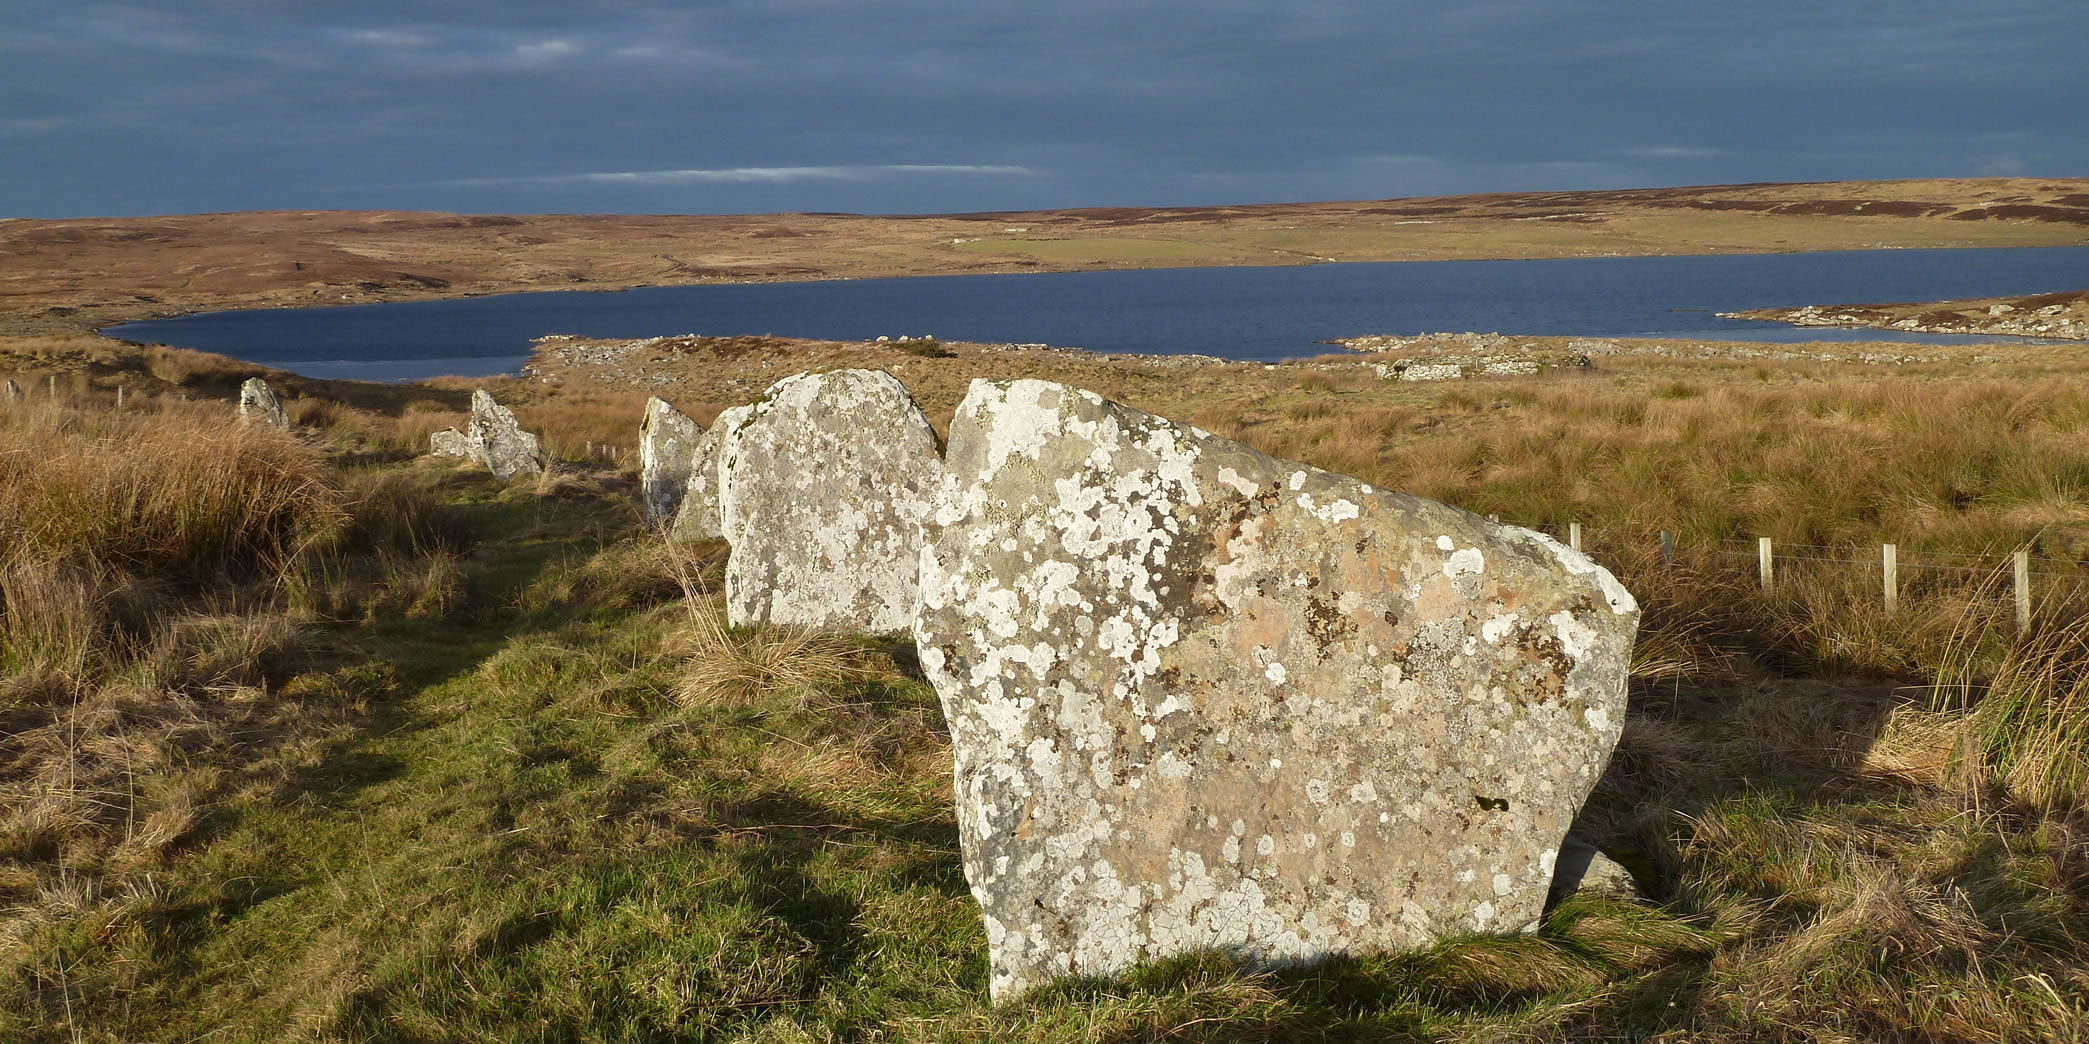 Achavanich standing stones are around 4,000 years old with views over Loch Stemster.